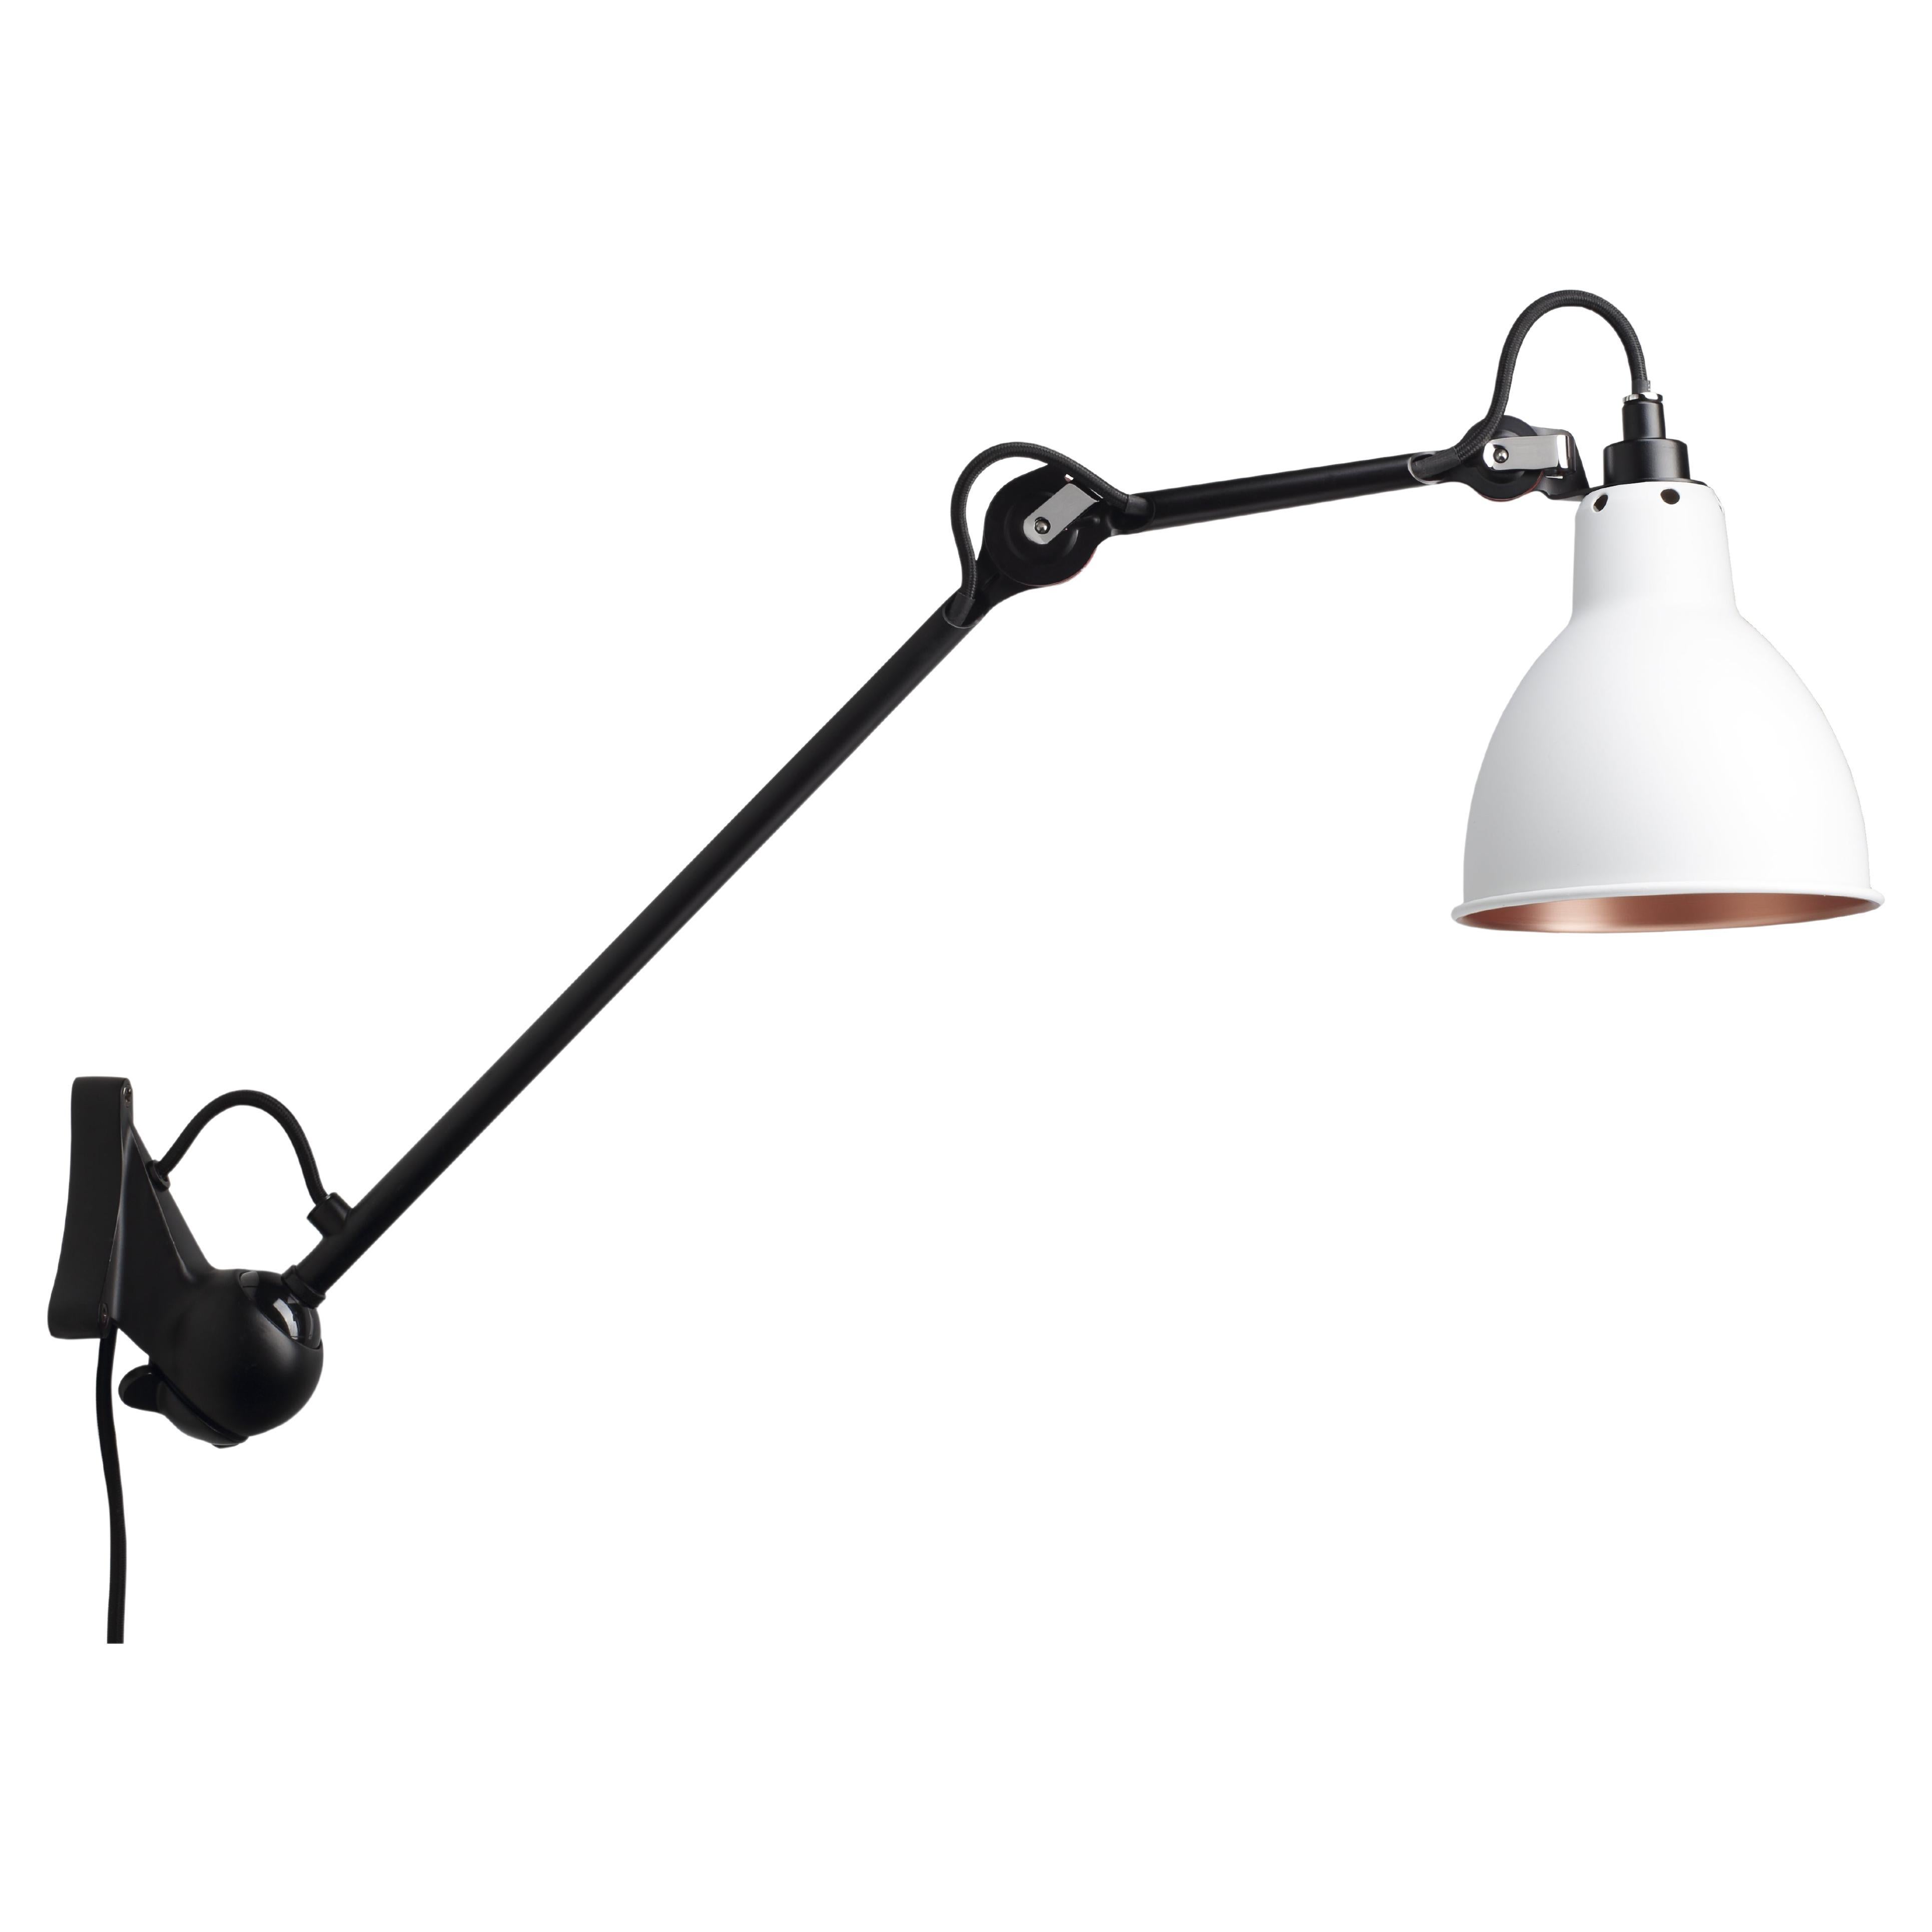 DCW Editions La Lampe Gras N°222 Wall Lamp in Black Arm and White Copper Shade For Sale